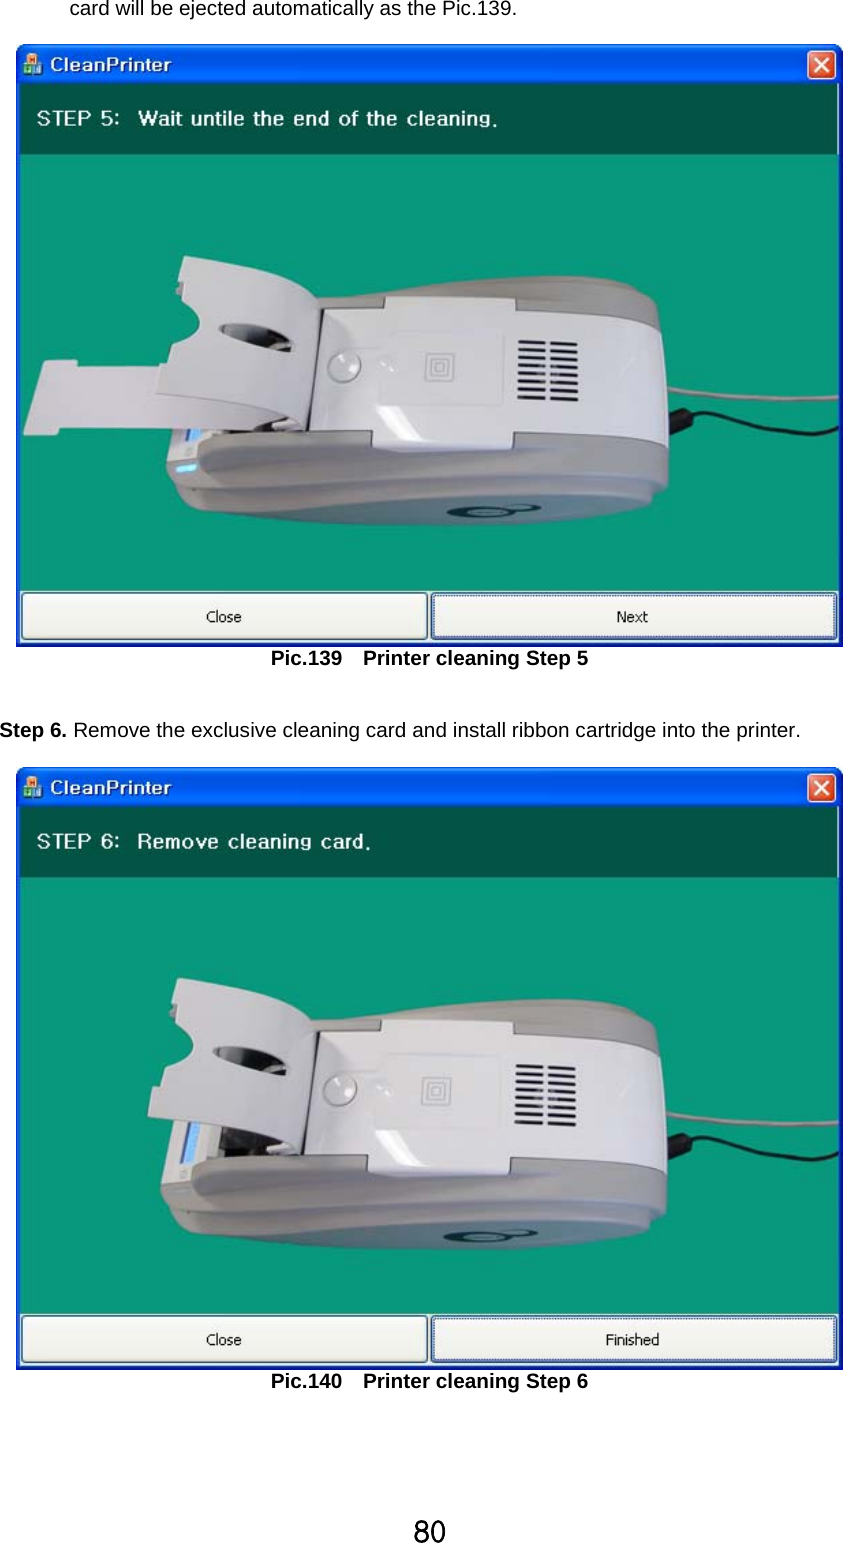 _Wcard will be ejected automatically as the Pic.139.Pic.139 Printer cleaning Step 5Step 6. Remove the exclusive cleaning card and install ribbon cartridge into the printer.Pic.140 Printer cleaning Step 6